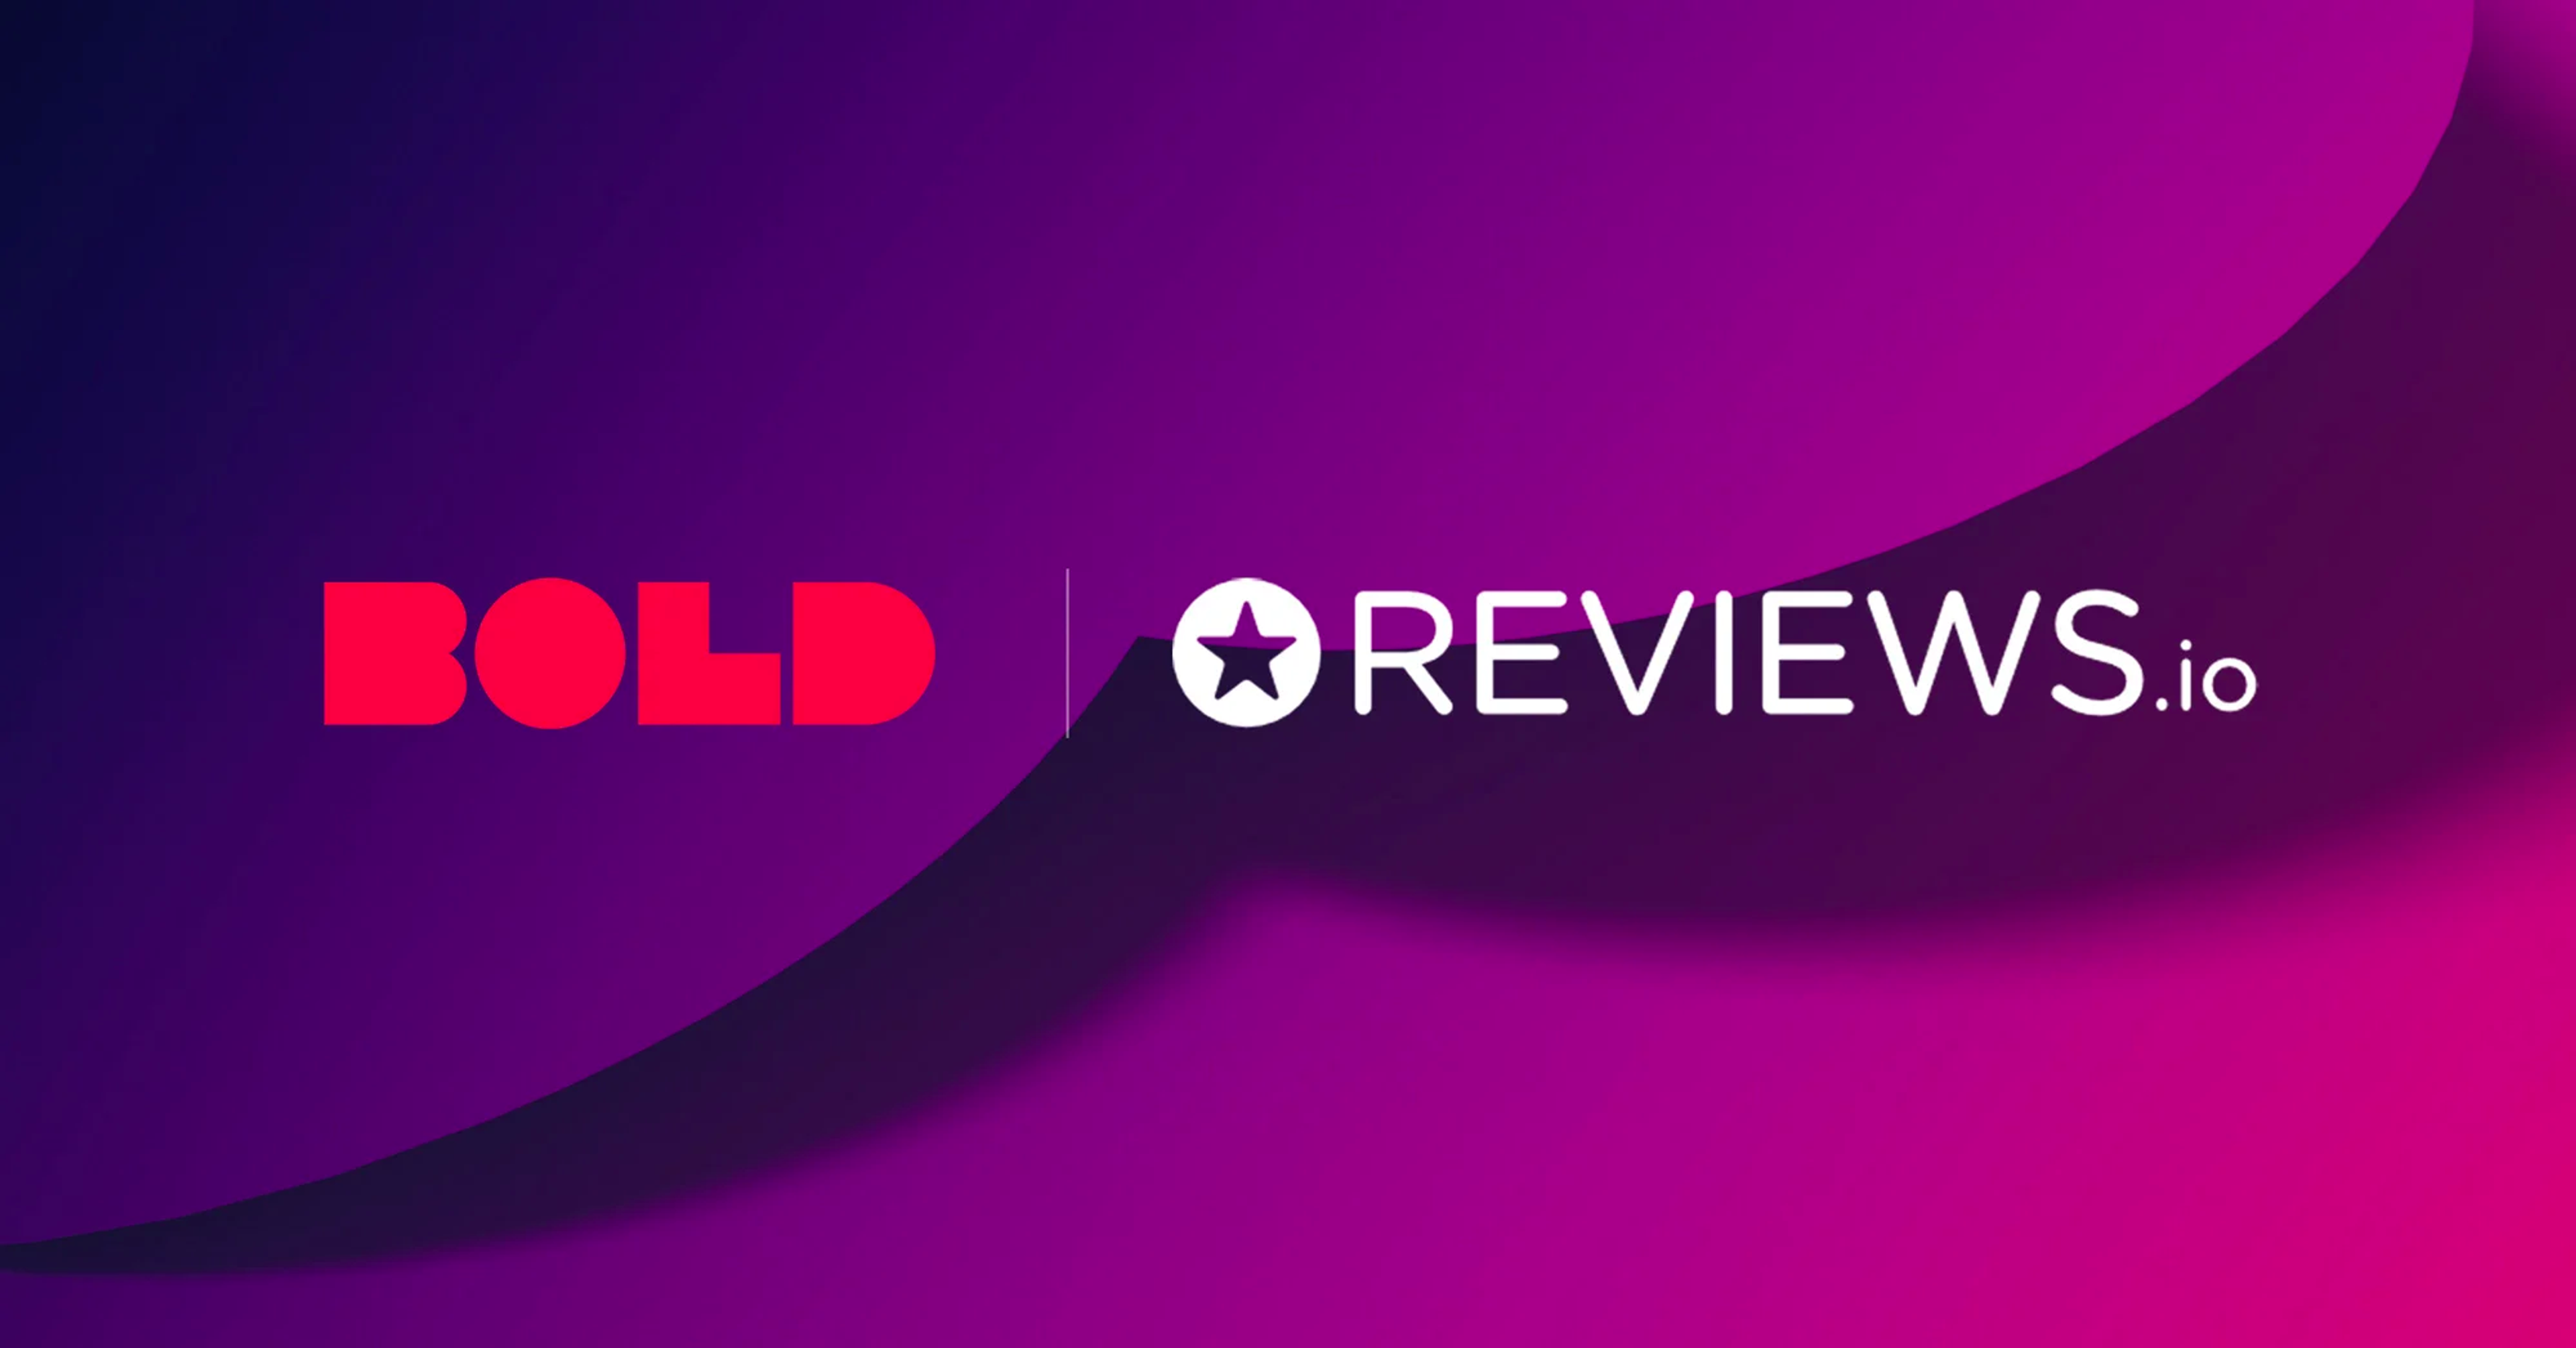 Bold Commerce and Reviews.io logos